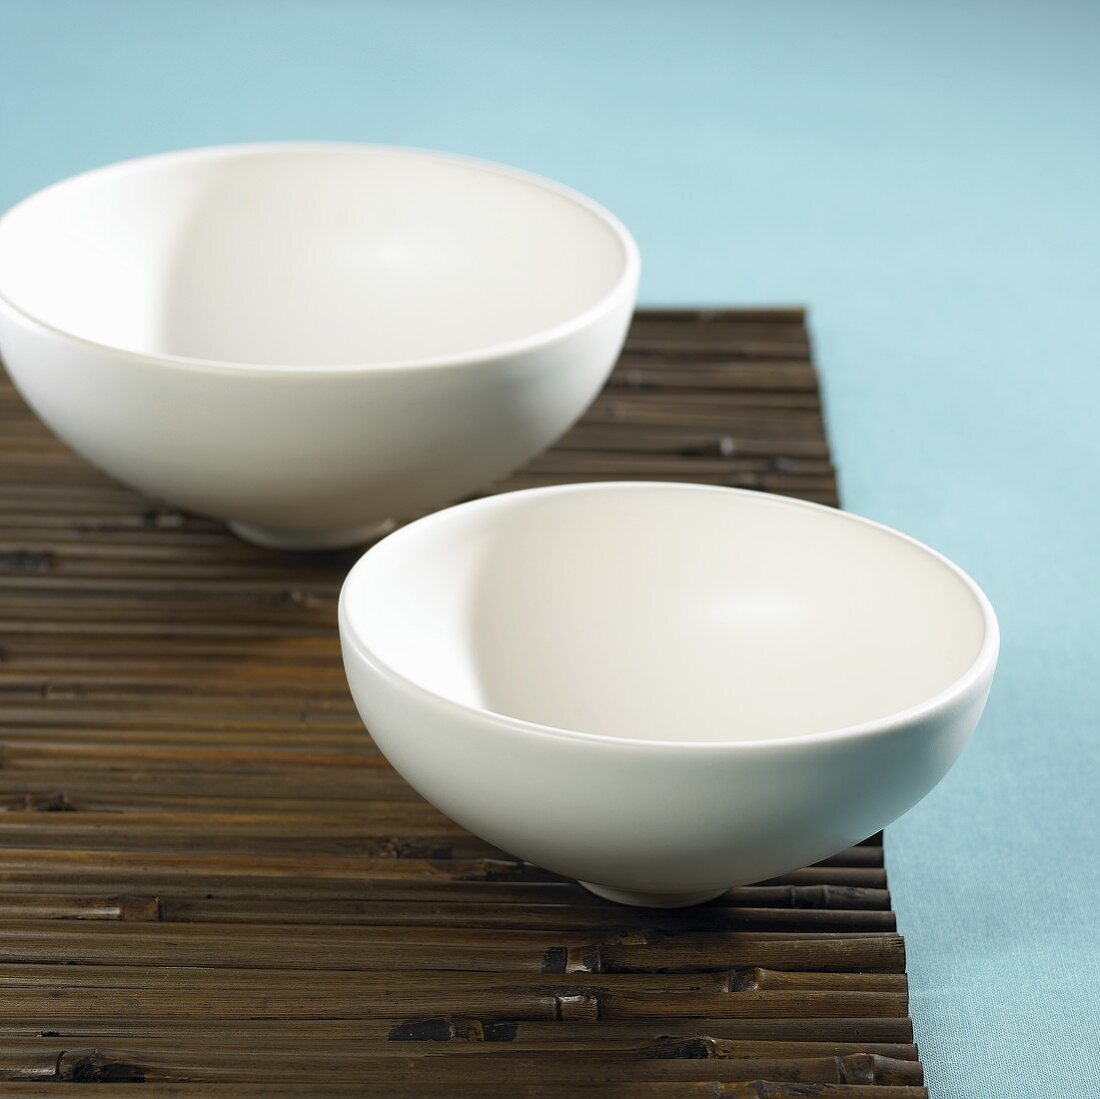 Two porcelain bowls on a bamboo mat